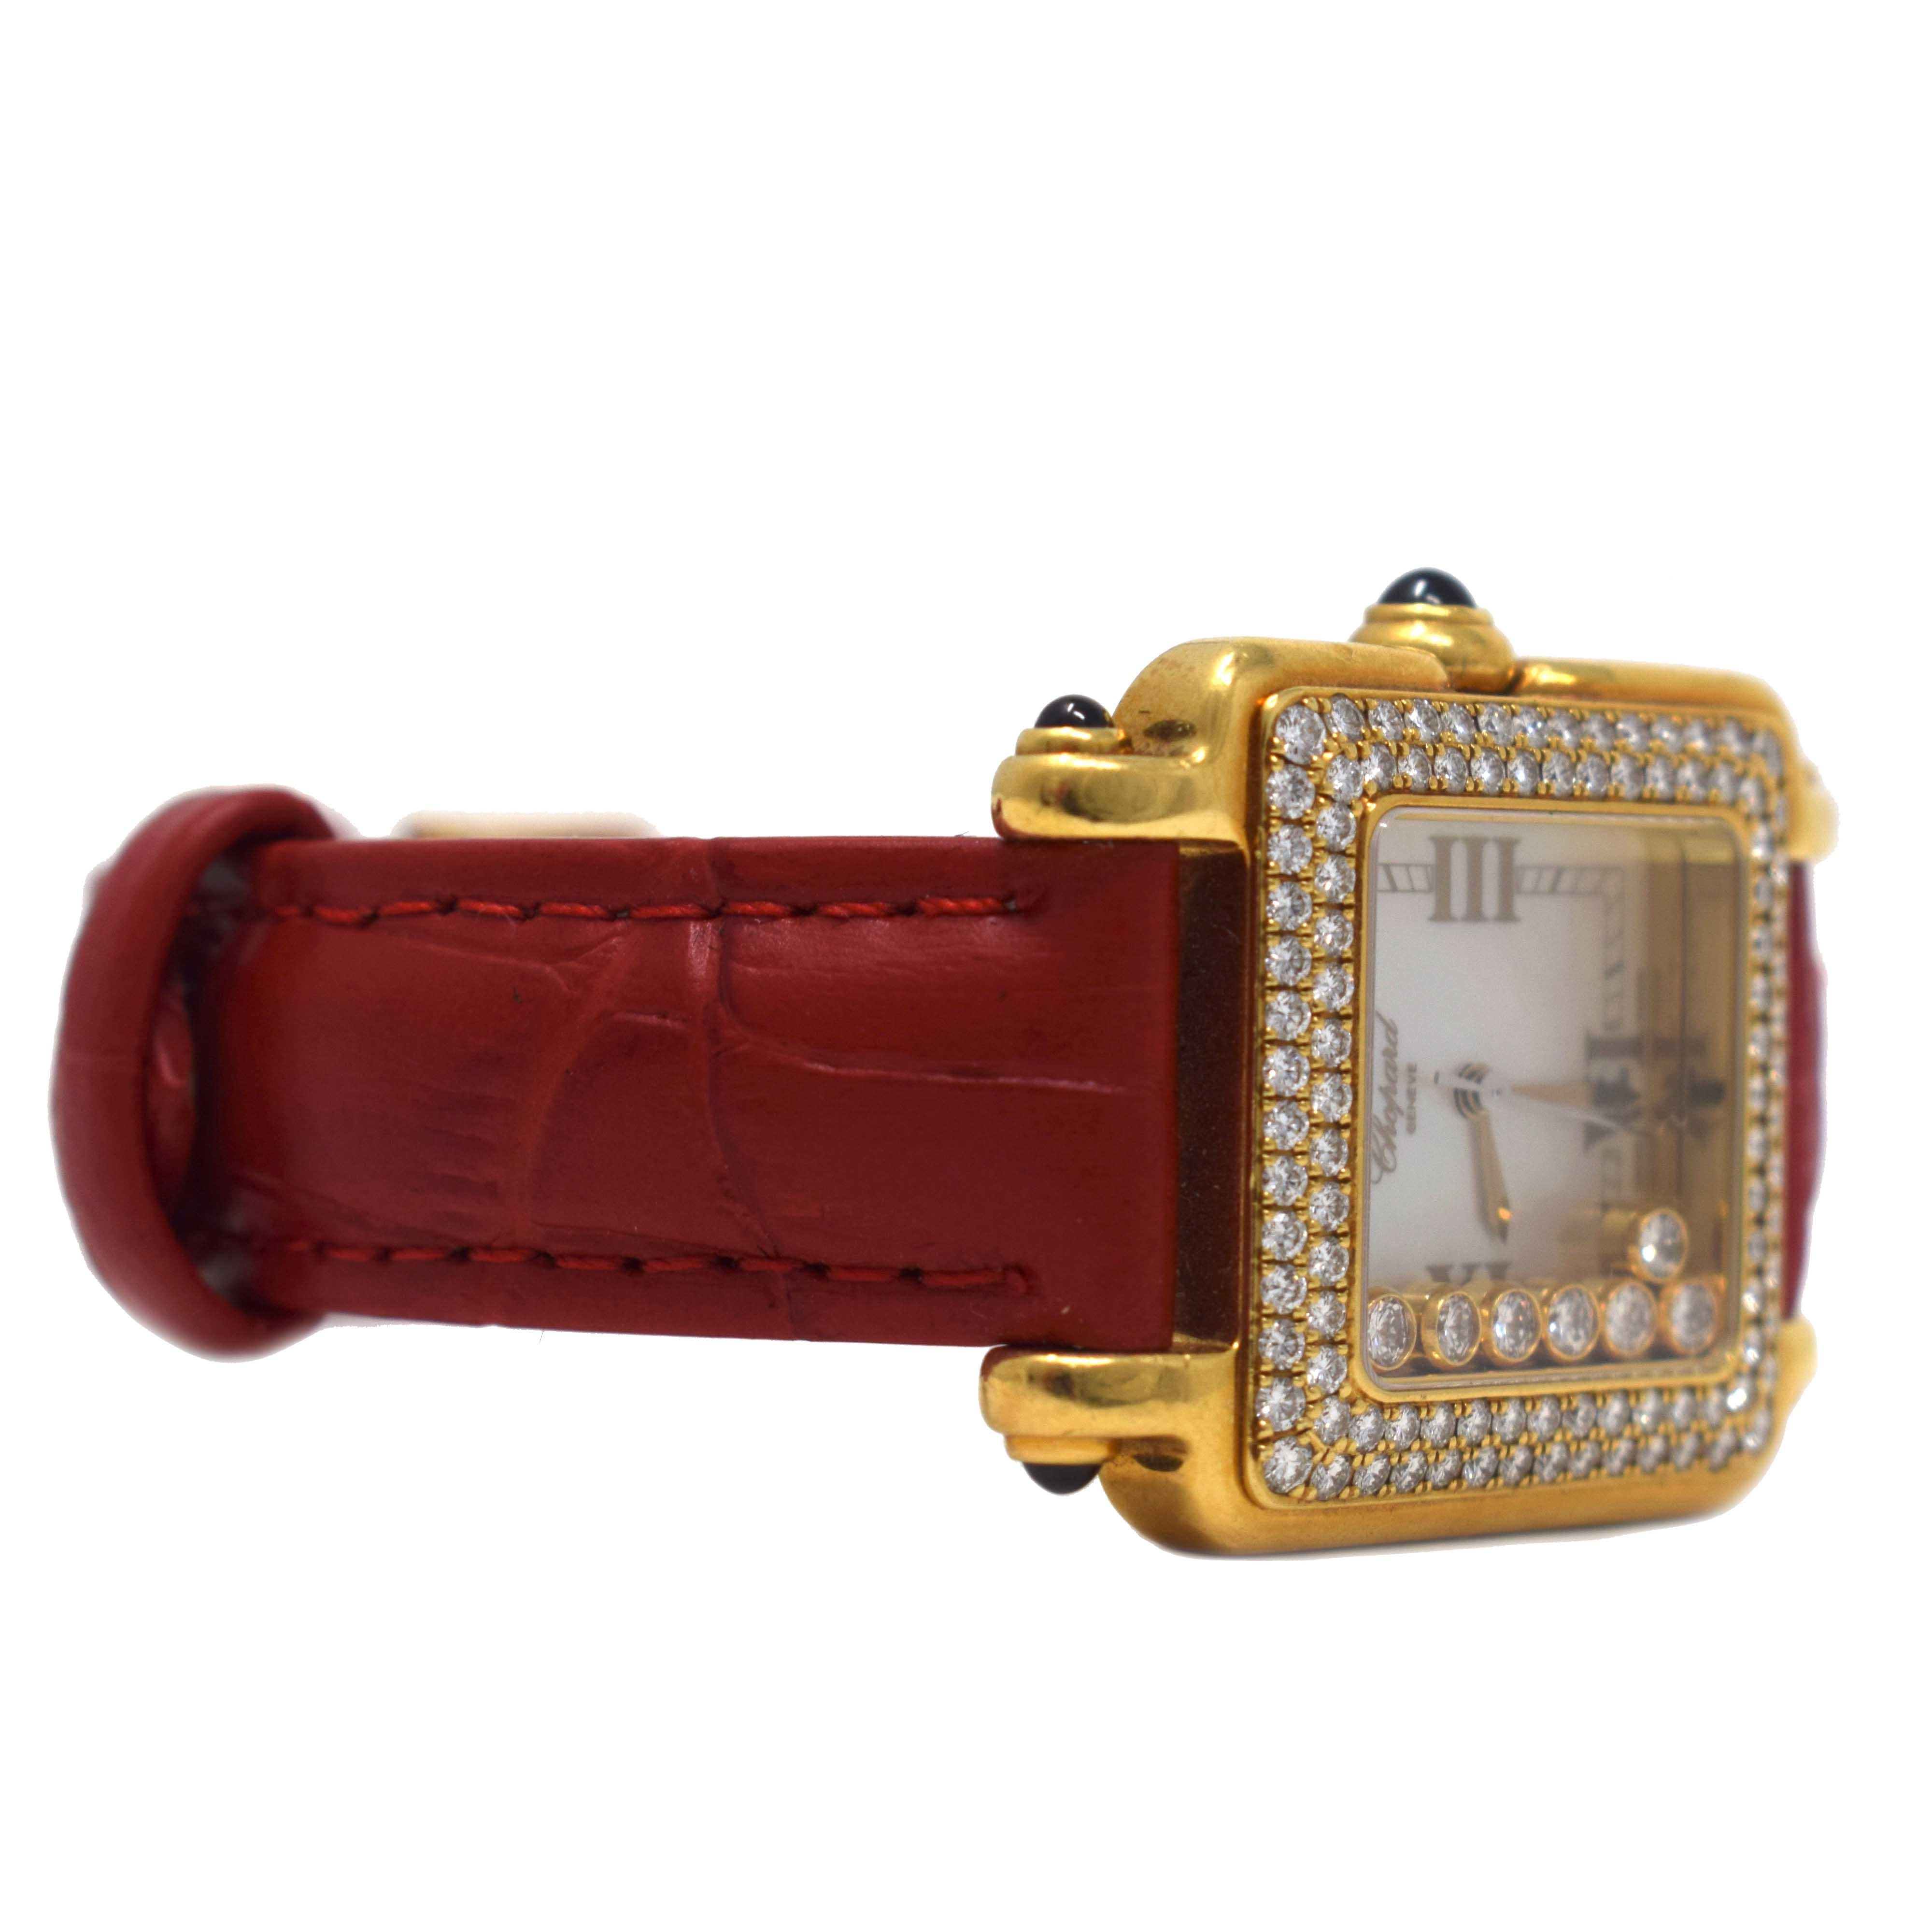 Brand: Chopard

Model Name: Happy Sport

Ref. Number: 27/6679-23

Movement: Quartz

Bezel: Fixed 18k Yellow Gold, Diamond-Paved

Dial: White Mother of Pearl, 7 Floating Diamonds

Case Size: 27 mm x 27 mm

Case Shape: Square

Case Material: 18k